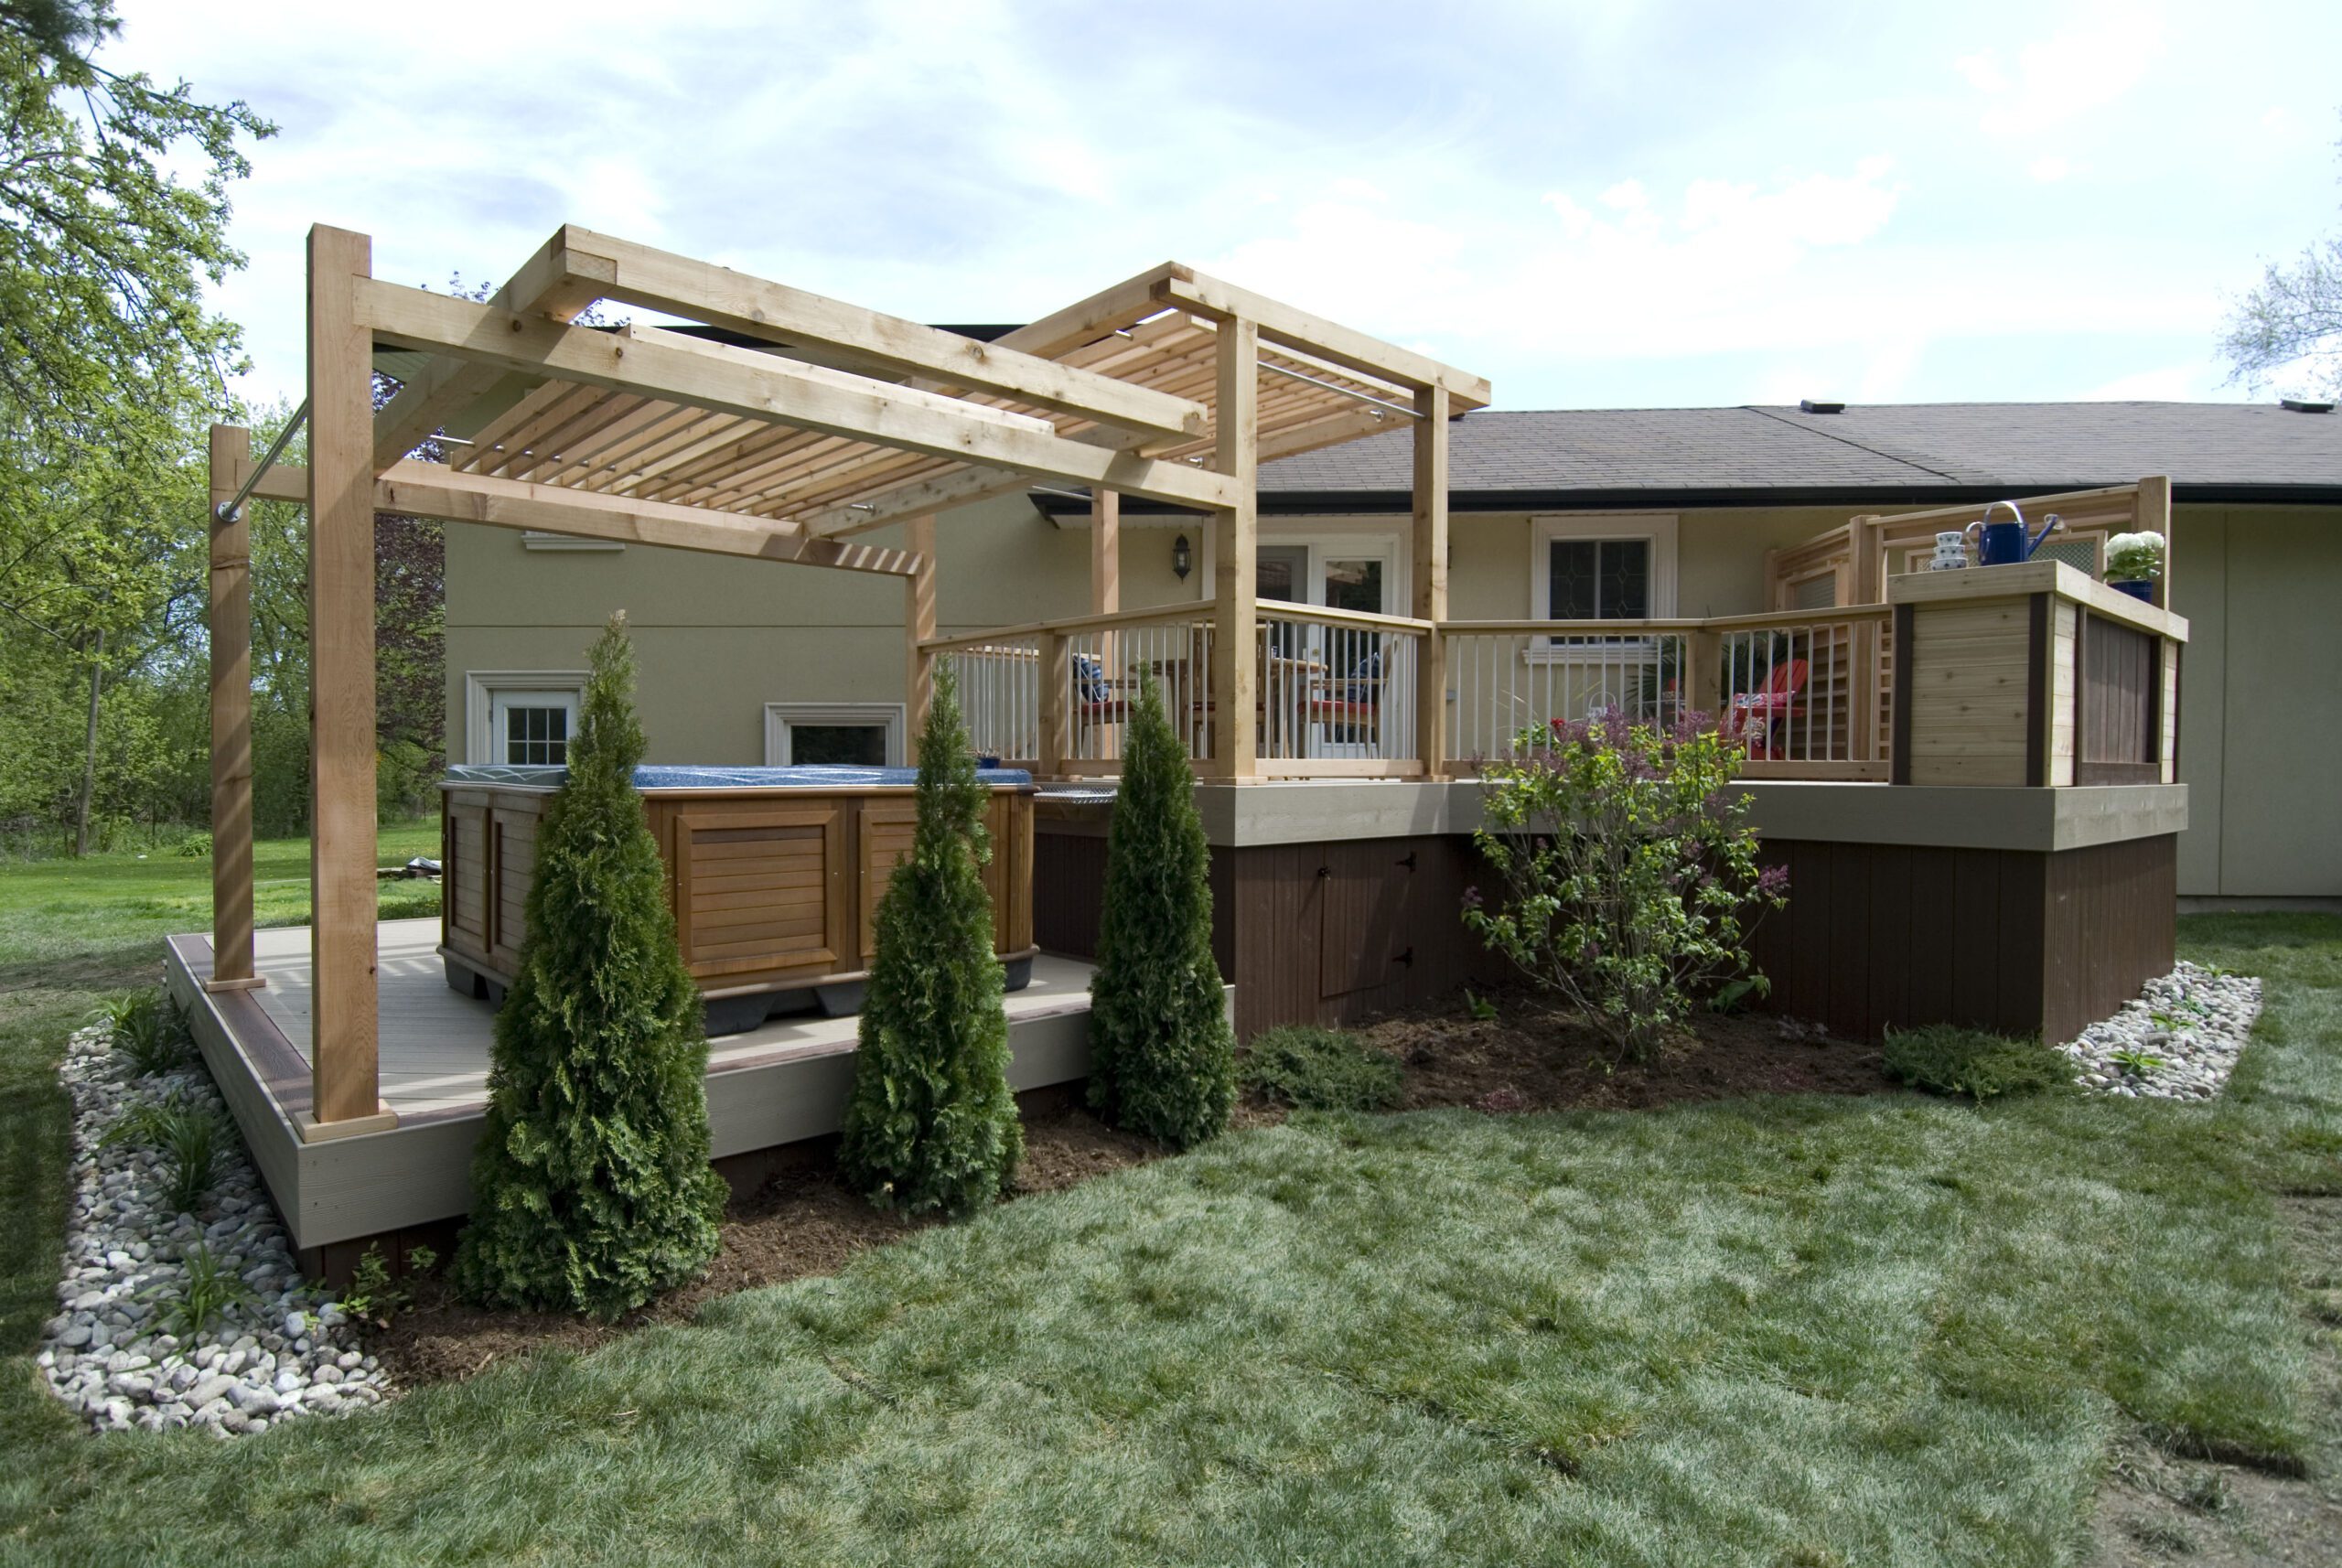 The Two-Step Pergola Deck